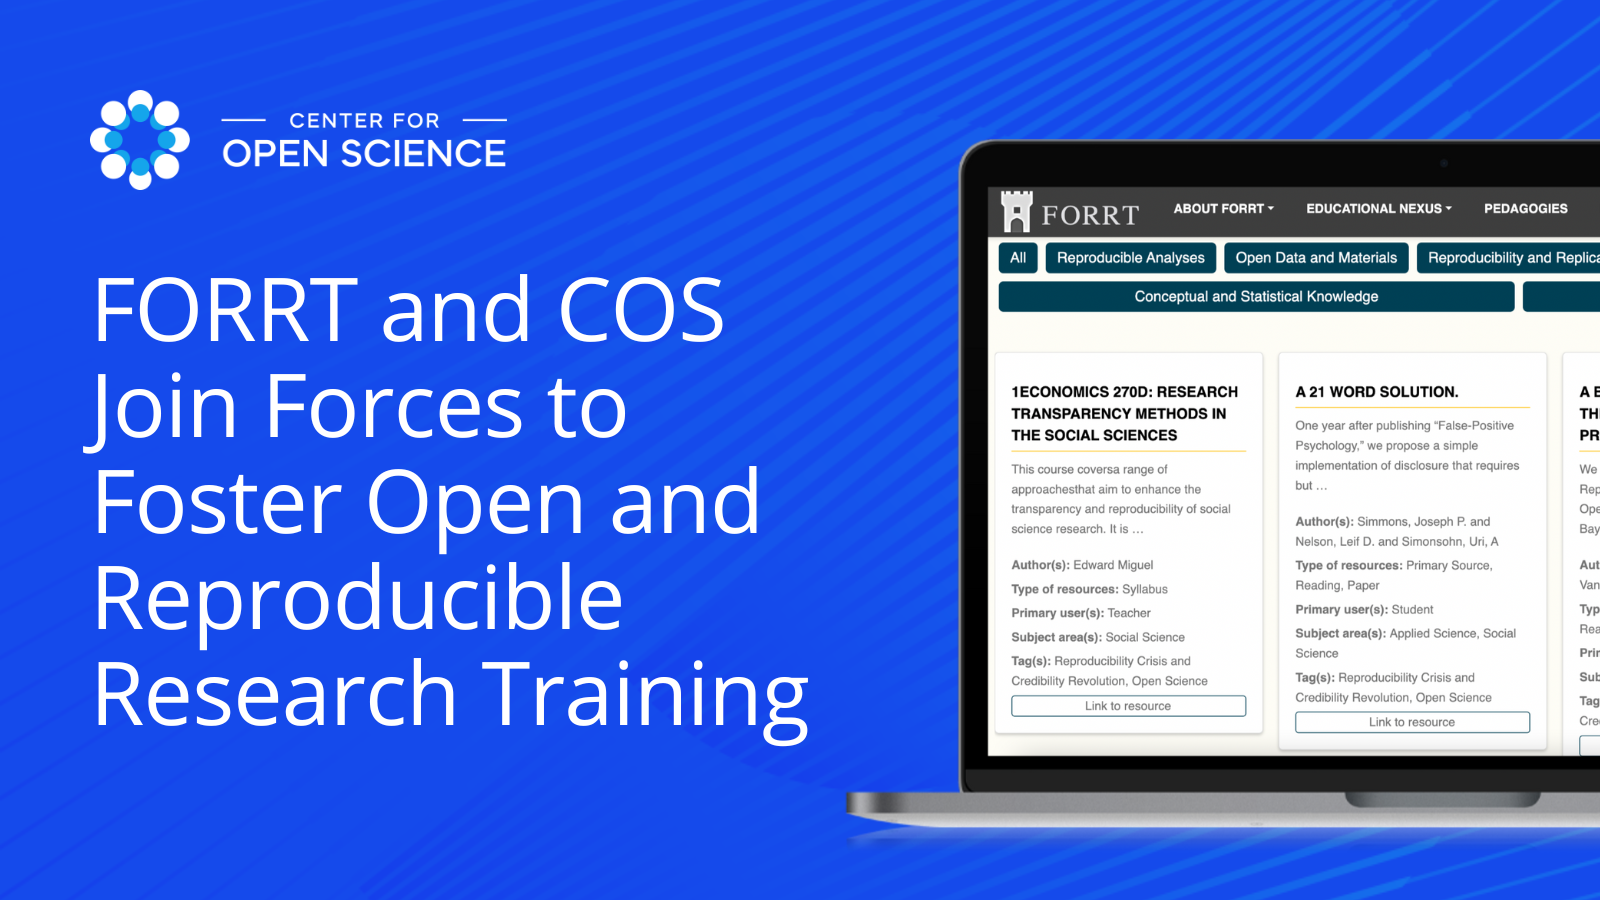 FORRT and the Center for Open Science Join Forces to Foster Open and Reproducible Research Training with screenshot from FORRT resource center